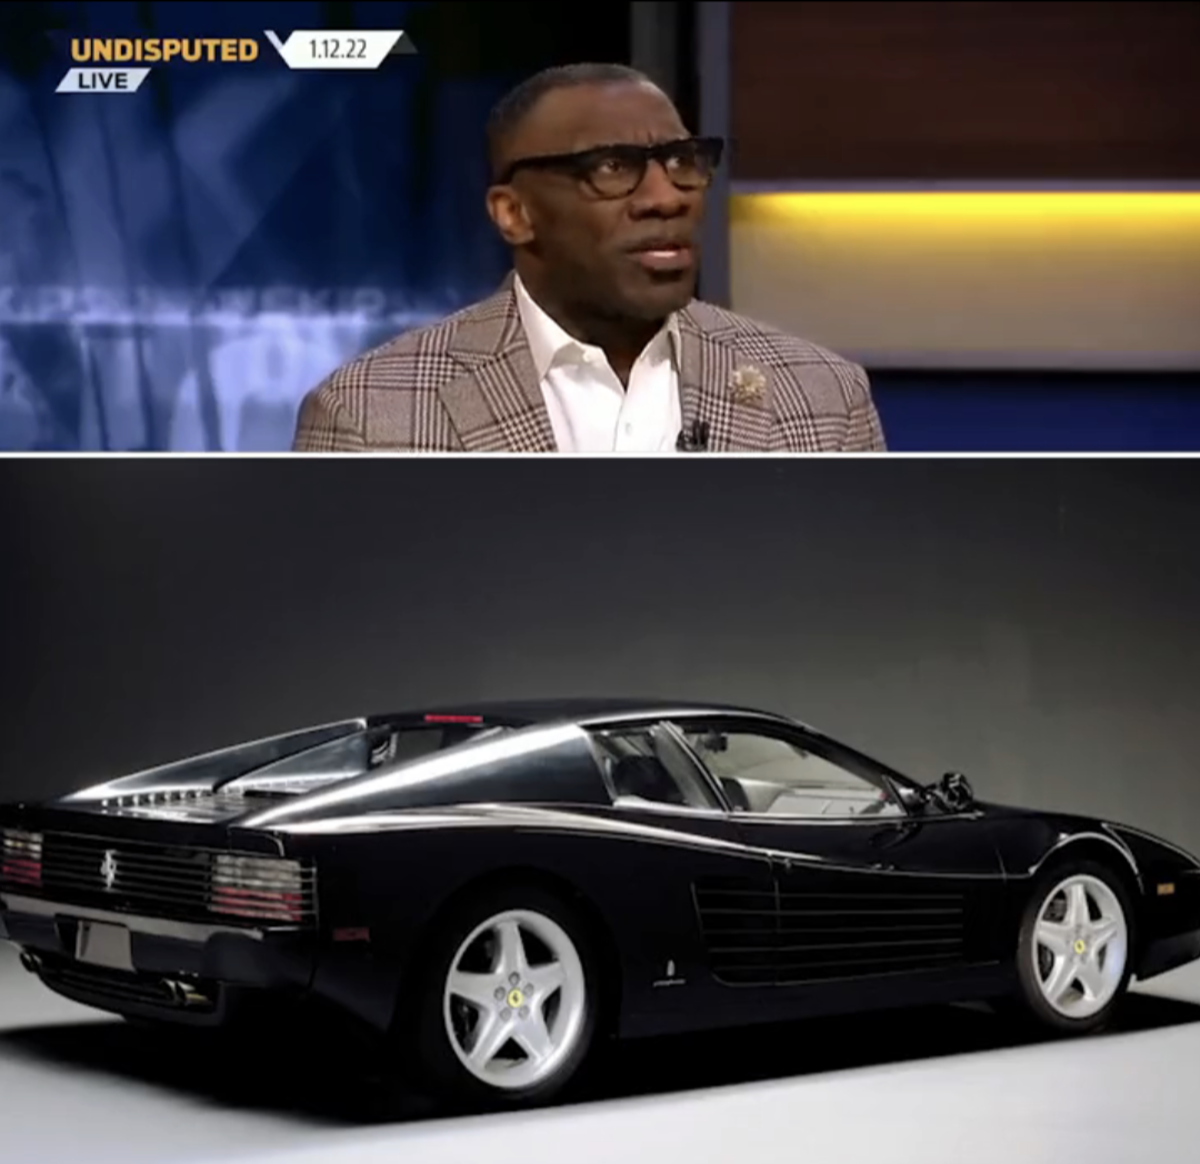 Shannon Sharpe: "In 1993, I Bought A $250K Car While Only Making $325K. That Wasn’t Wise, But I Was Looking Like Batman In Them Atlanta Streets."